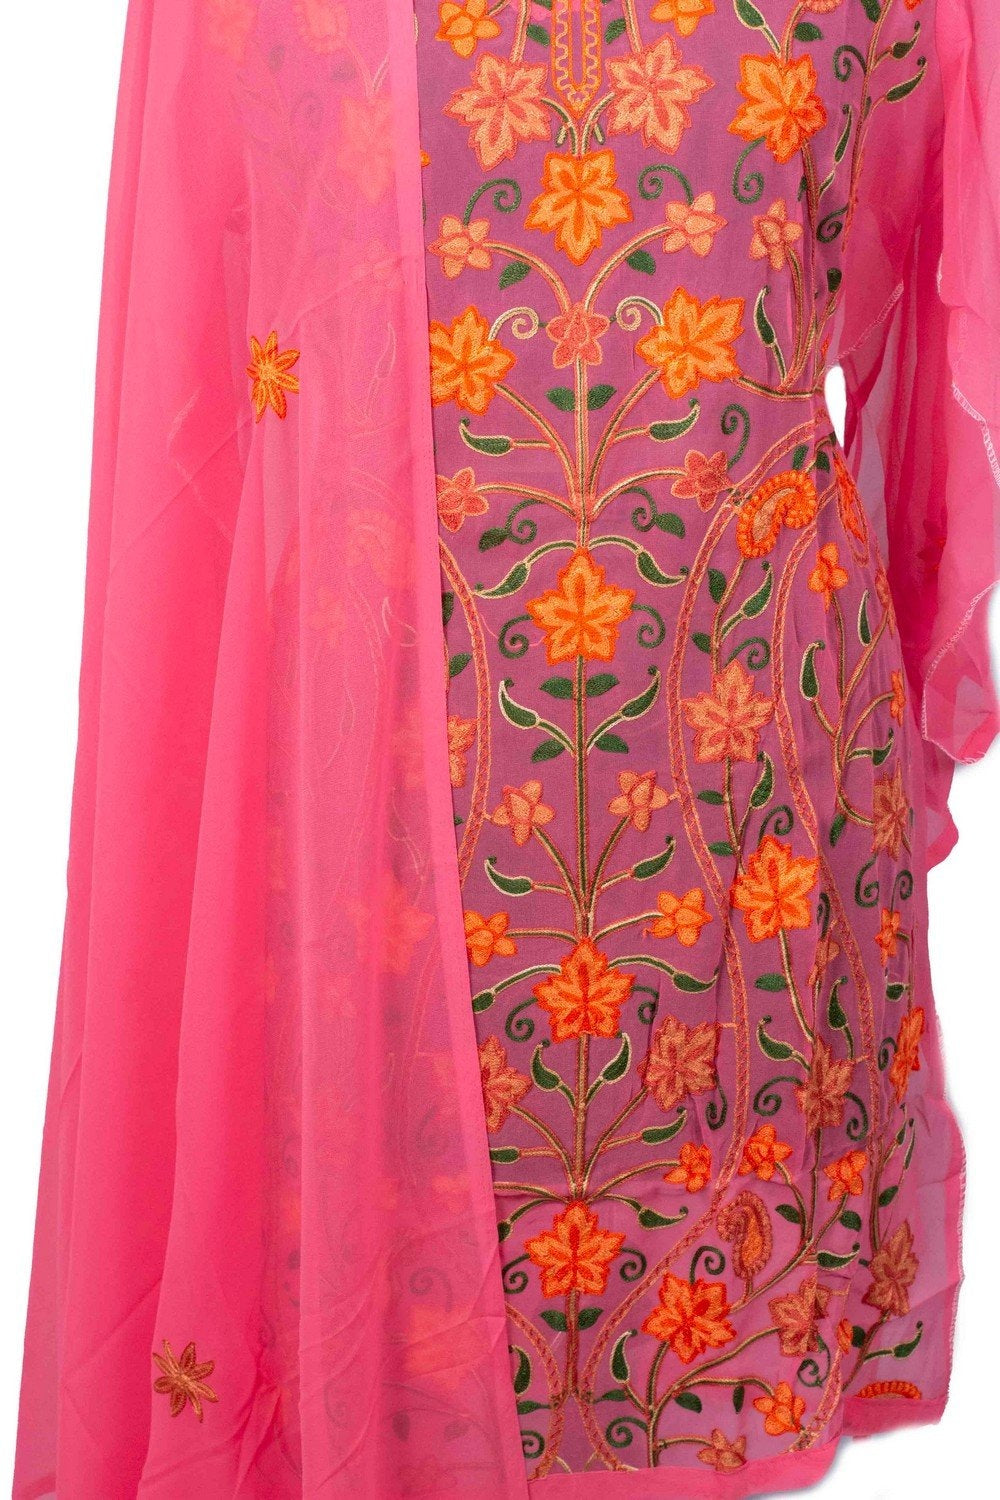 Pink Colour Aari Work Neck Kurti With Thread Embroidery